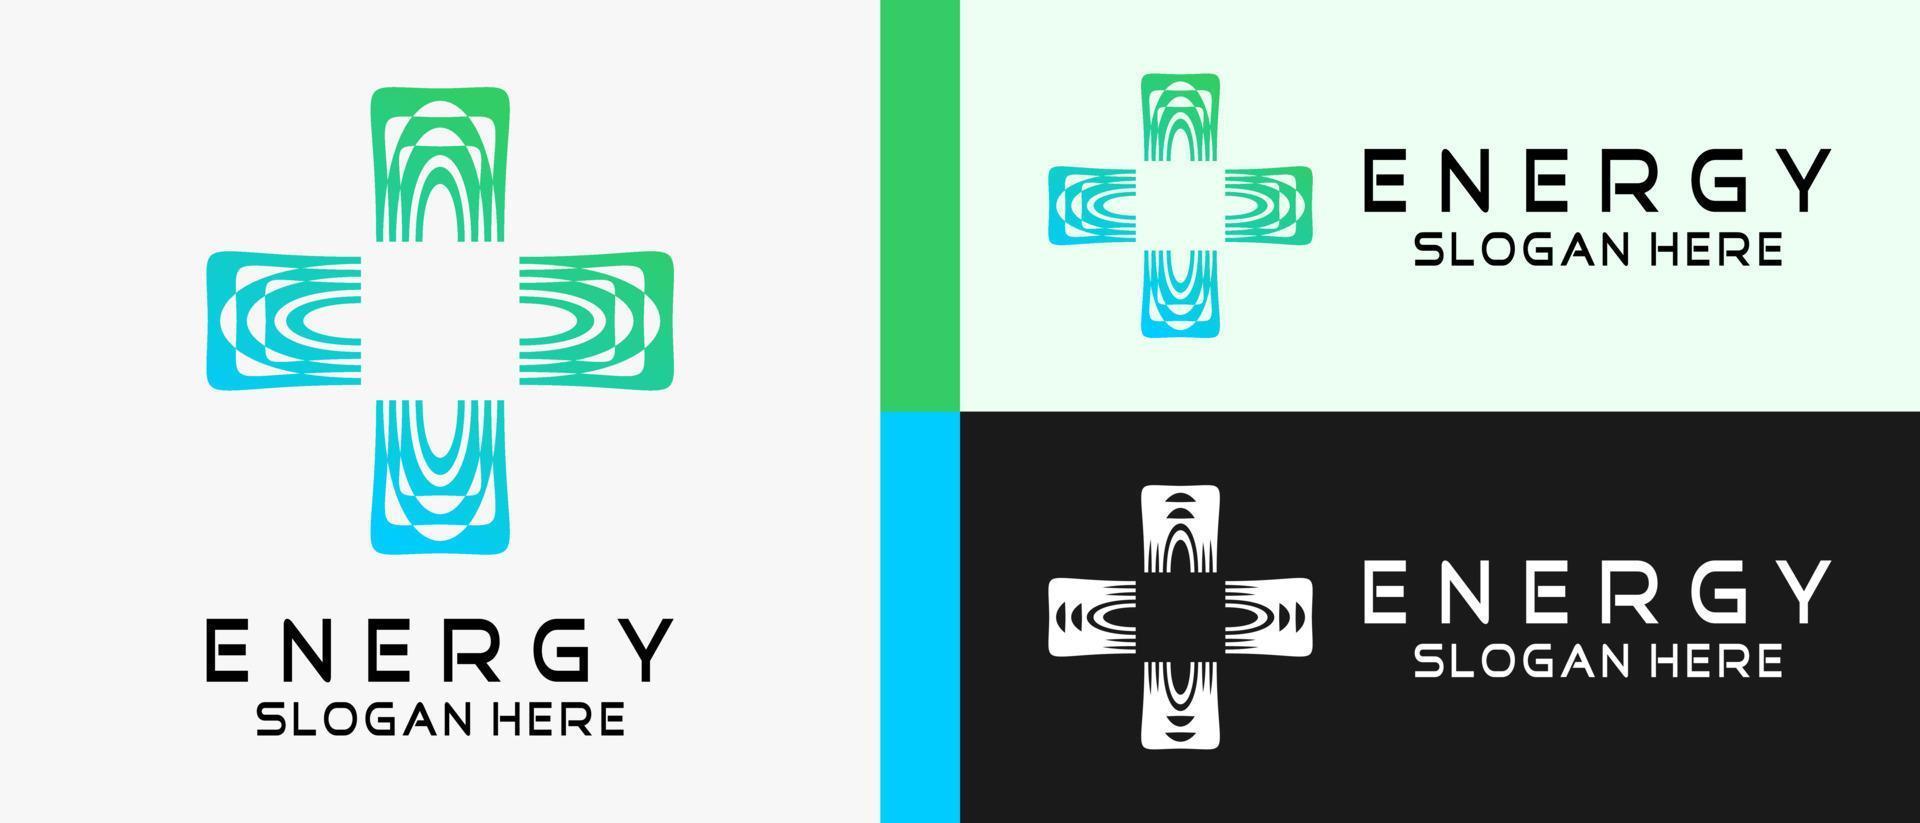 energy logo design template with creative abstract element concept in the form of a cross or plus sign. premium vector logo illustration